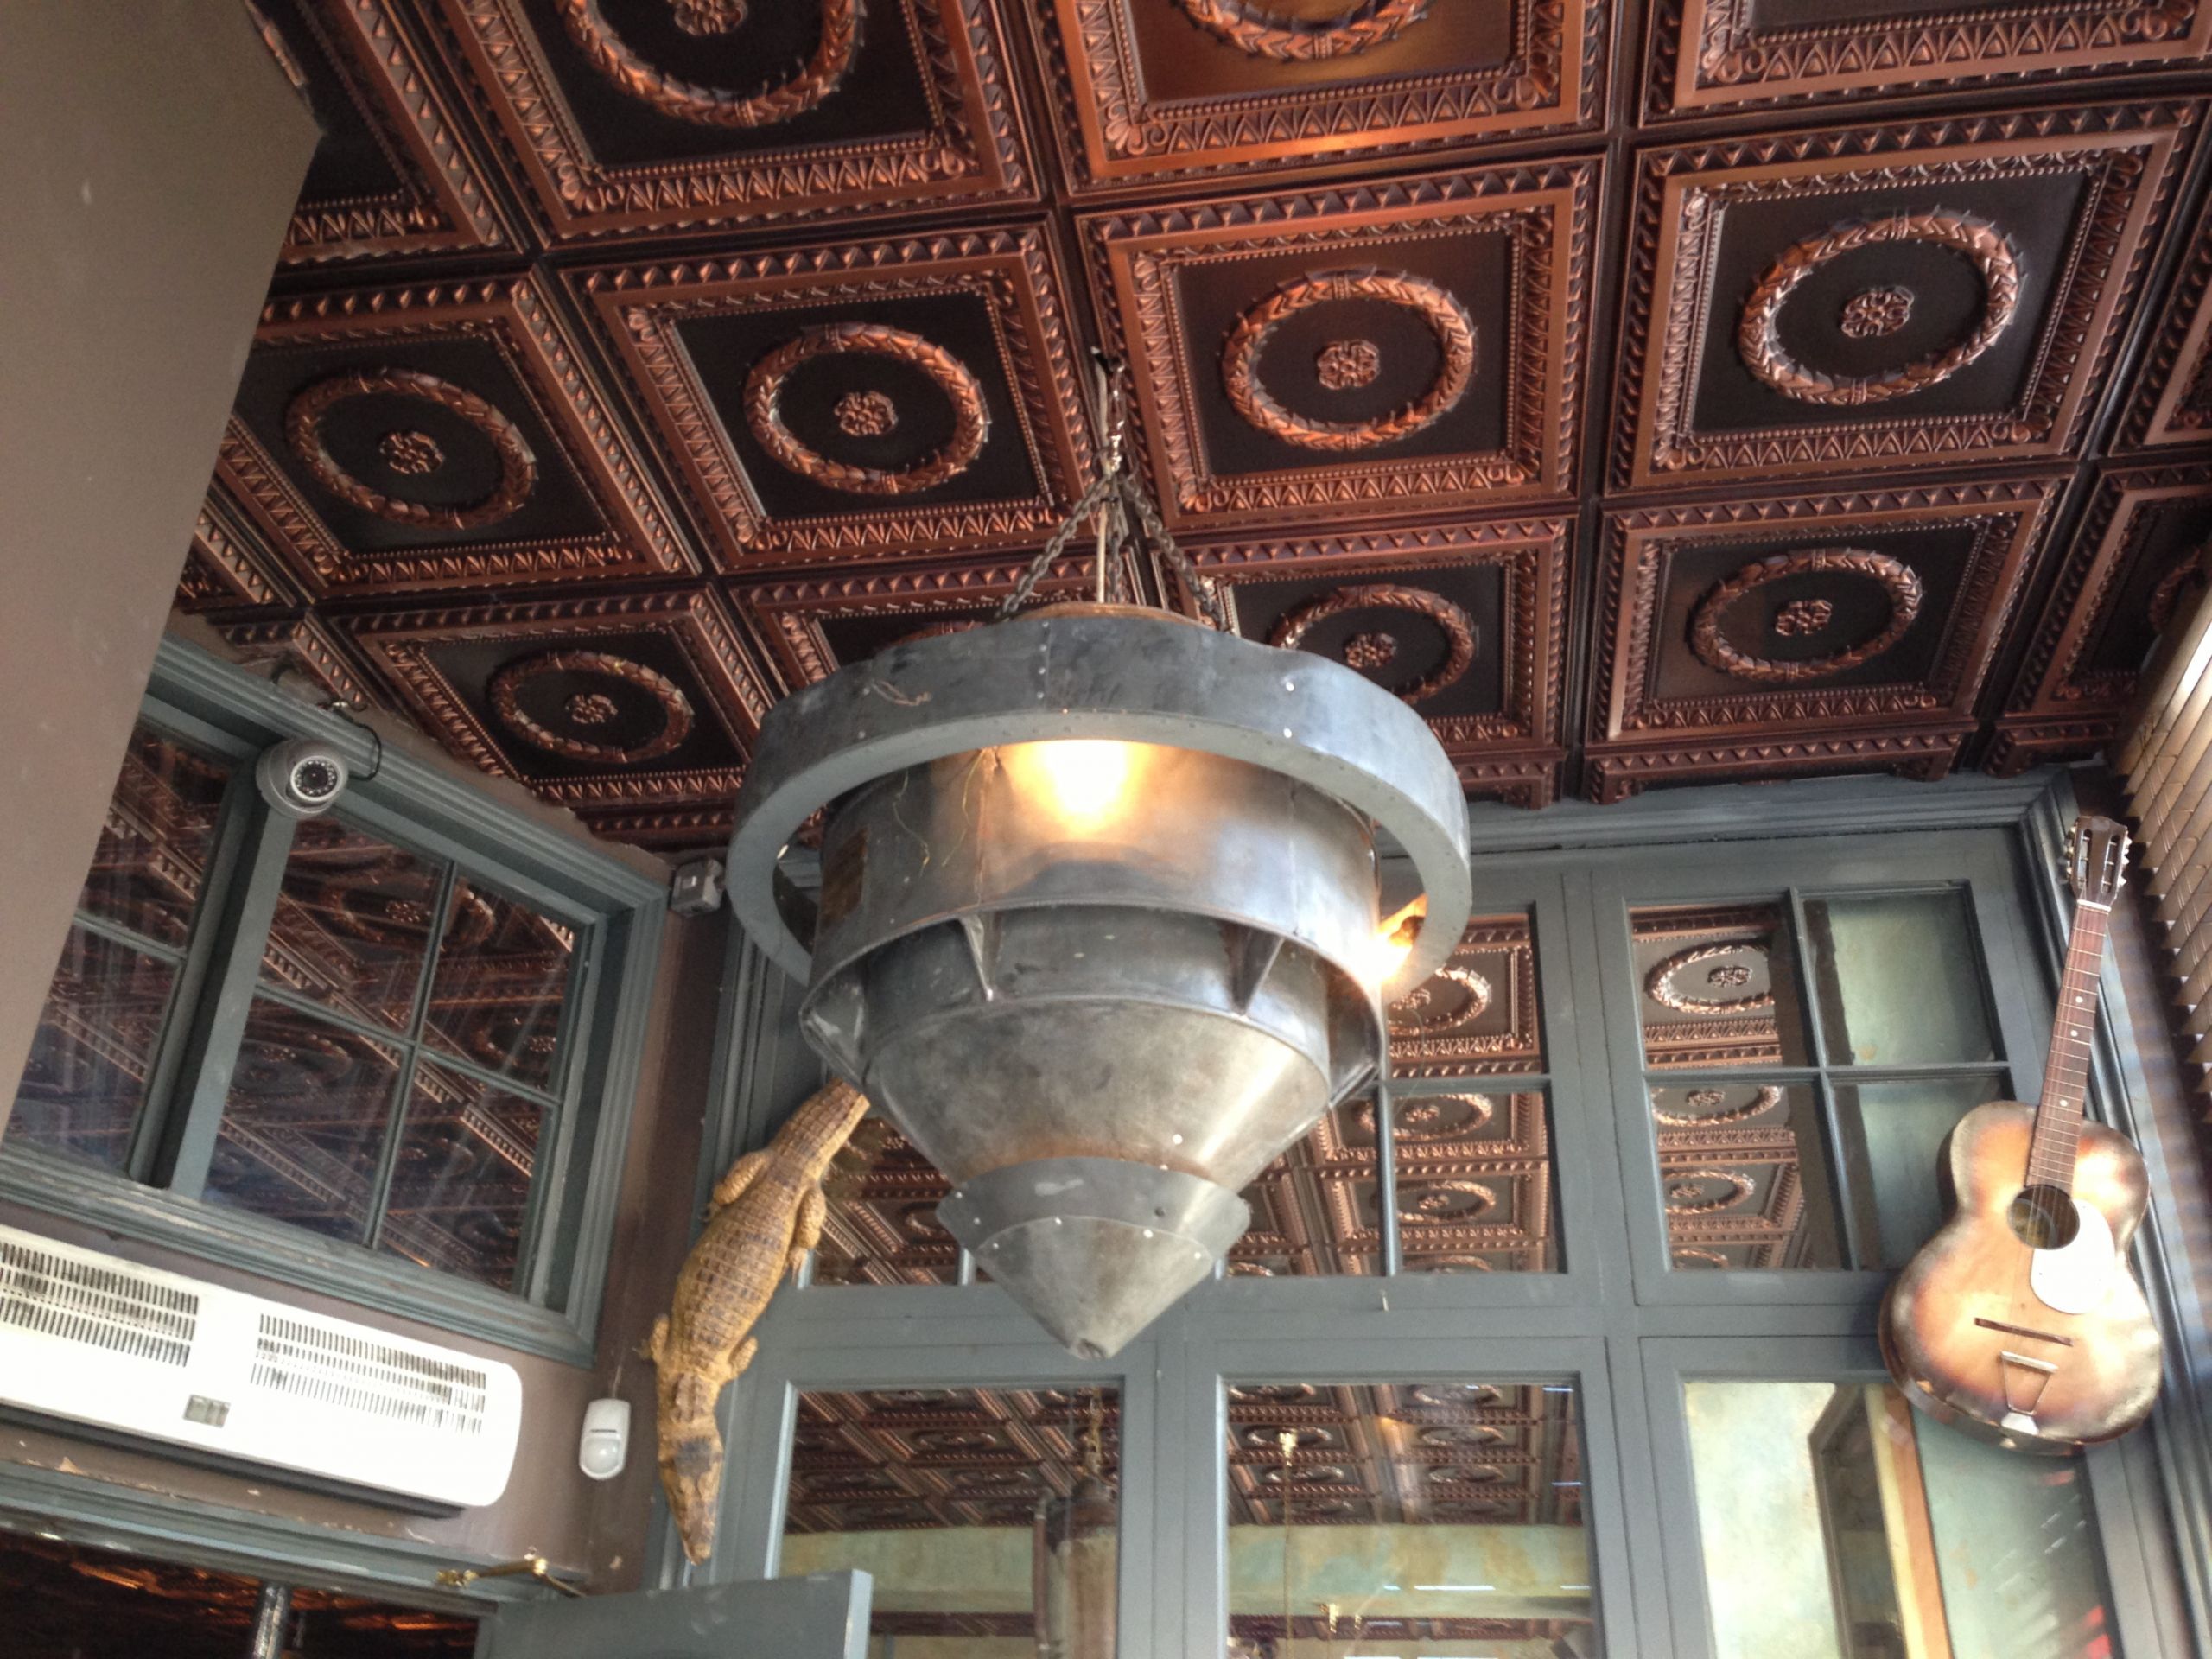 Restaurant Kitchen Ceiling Tiles
 Look at Our Decorative Ceiling Tiles in London